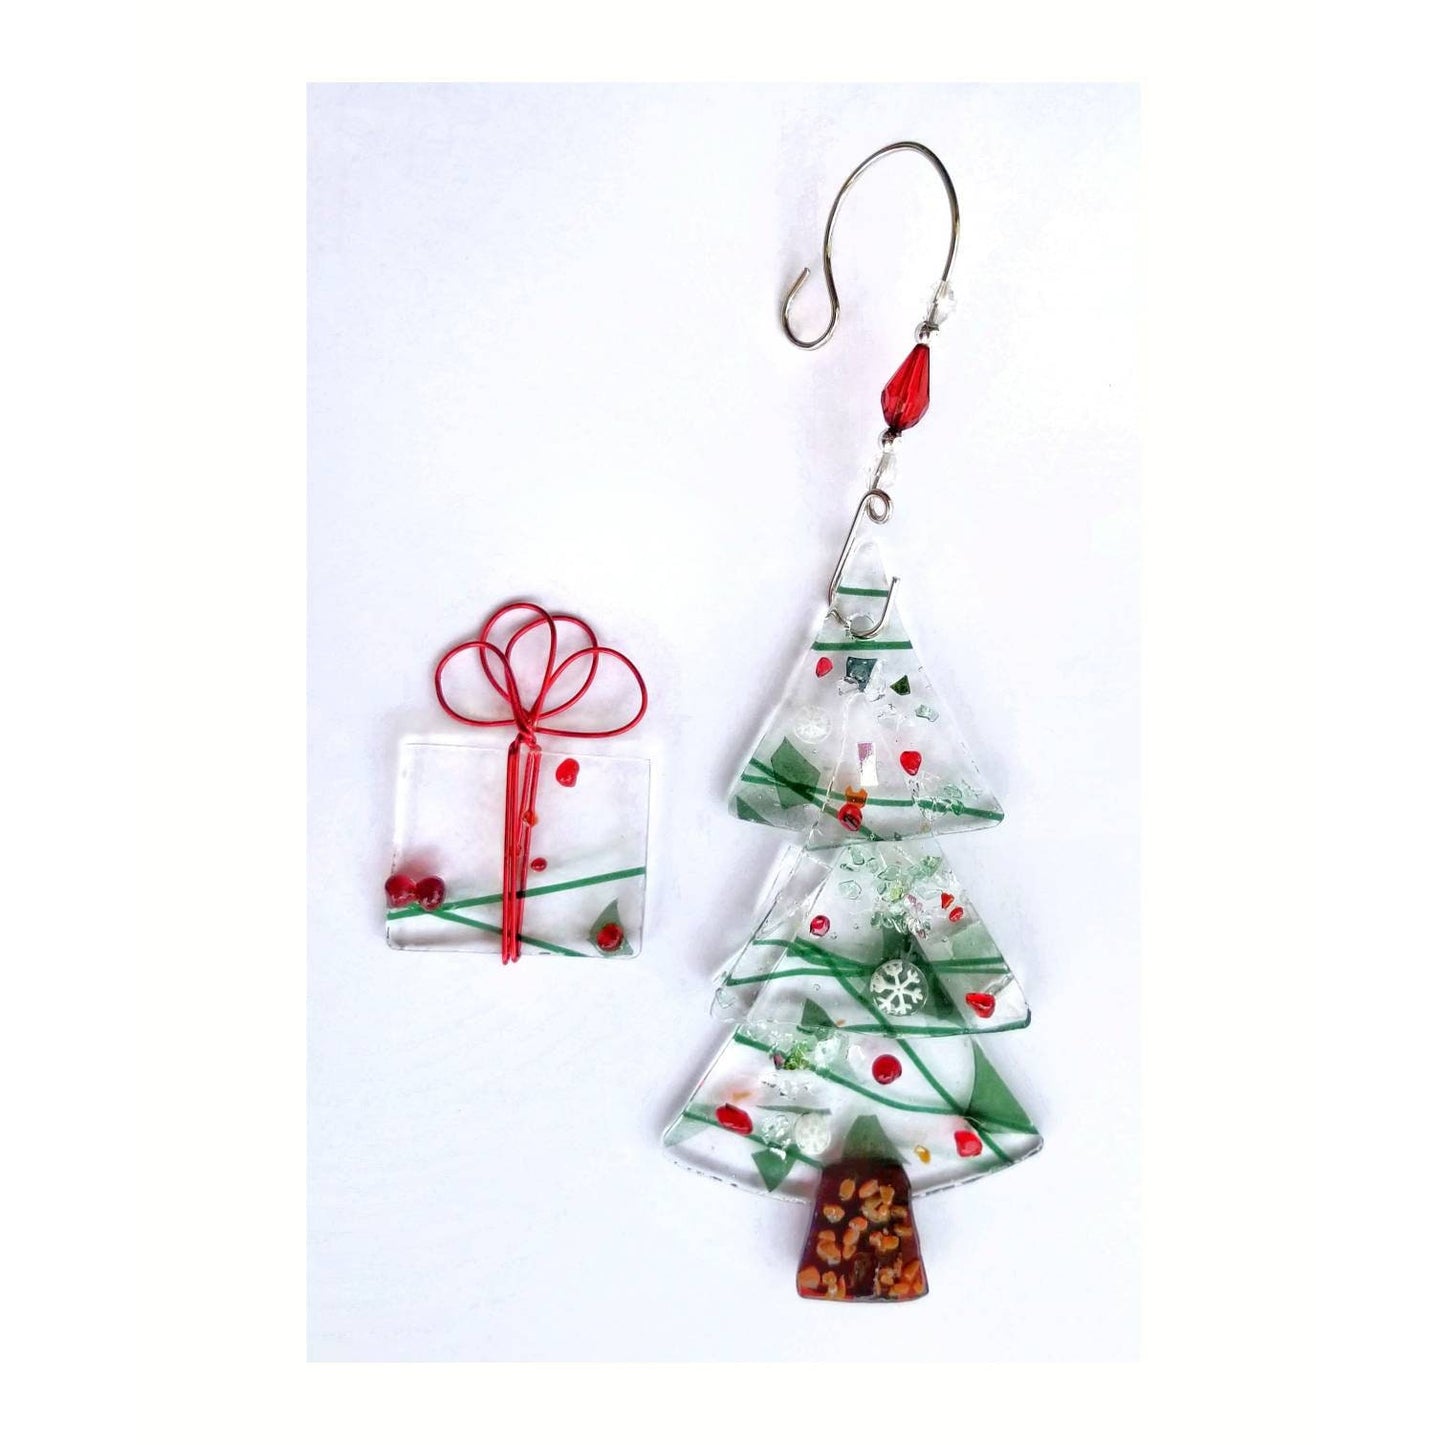 Christmas Tree Decor. Fused Glass Suncatcher & Gift Tag Ornament. 2 Piece Set. Kiln fired Holly Berry Glass. Gift boxed. Handmade.